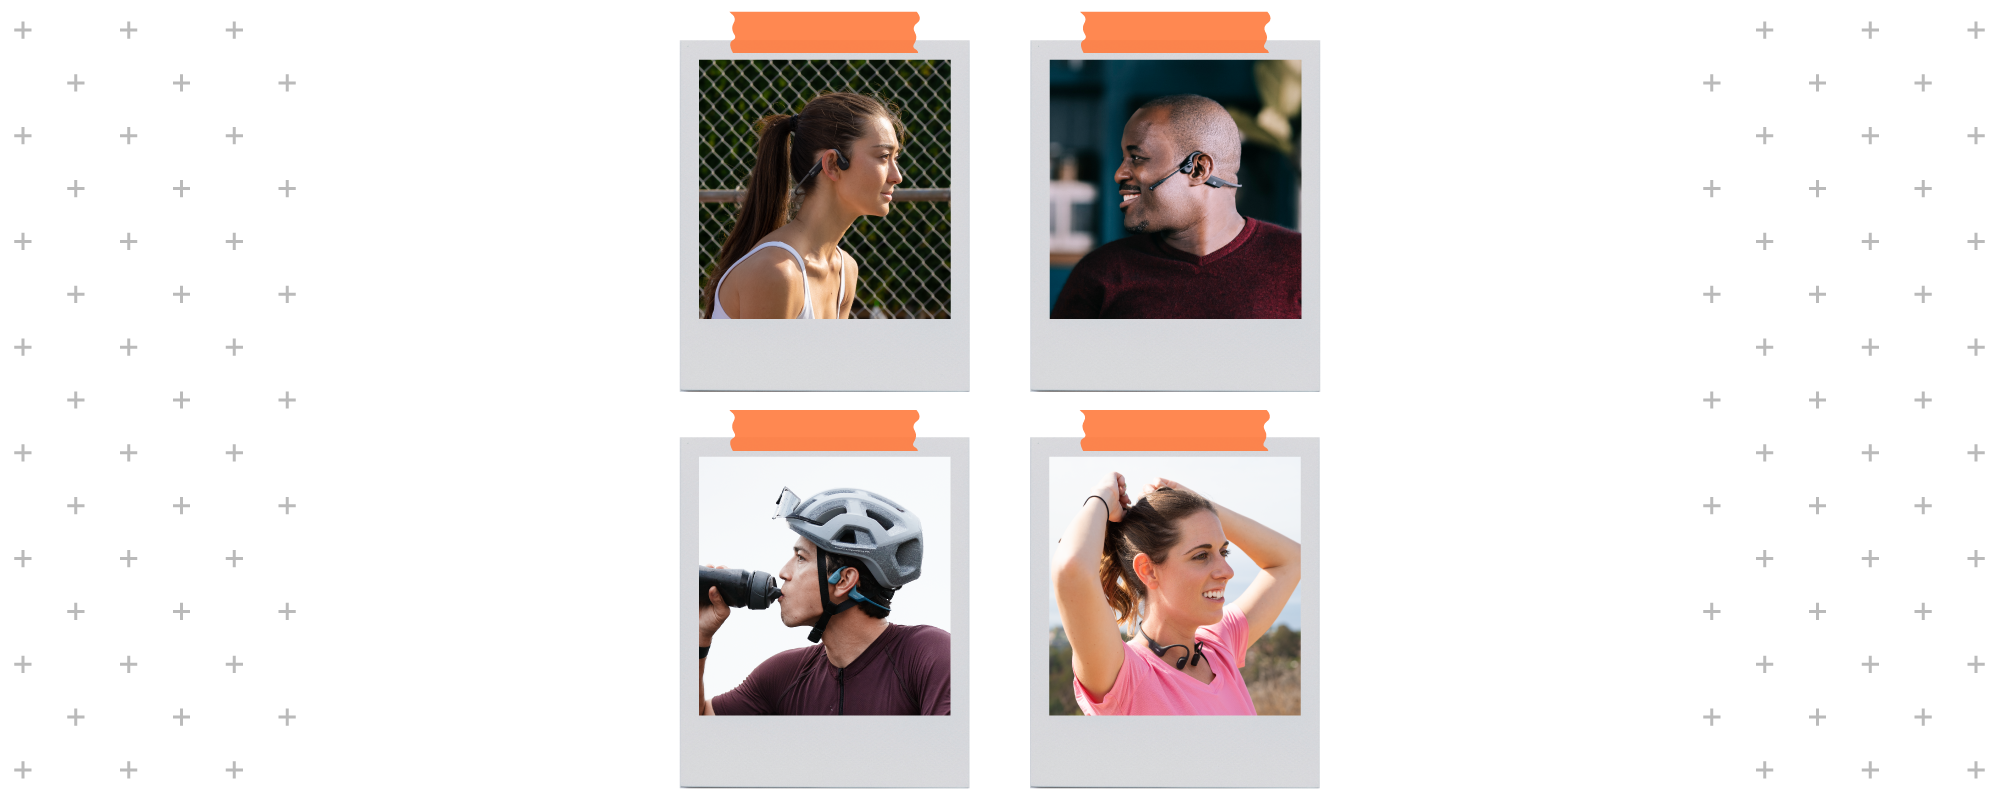 Graphic of four Shokz products. Top row from left to right: OpenMove, OpenComm UC. Bottom row from left to right: OpenRun Pro, OpenRun